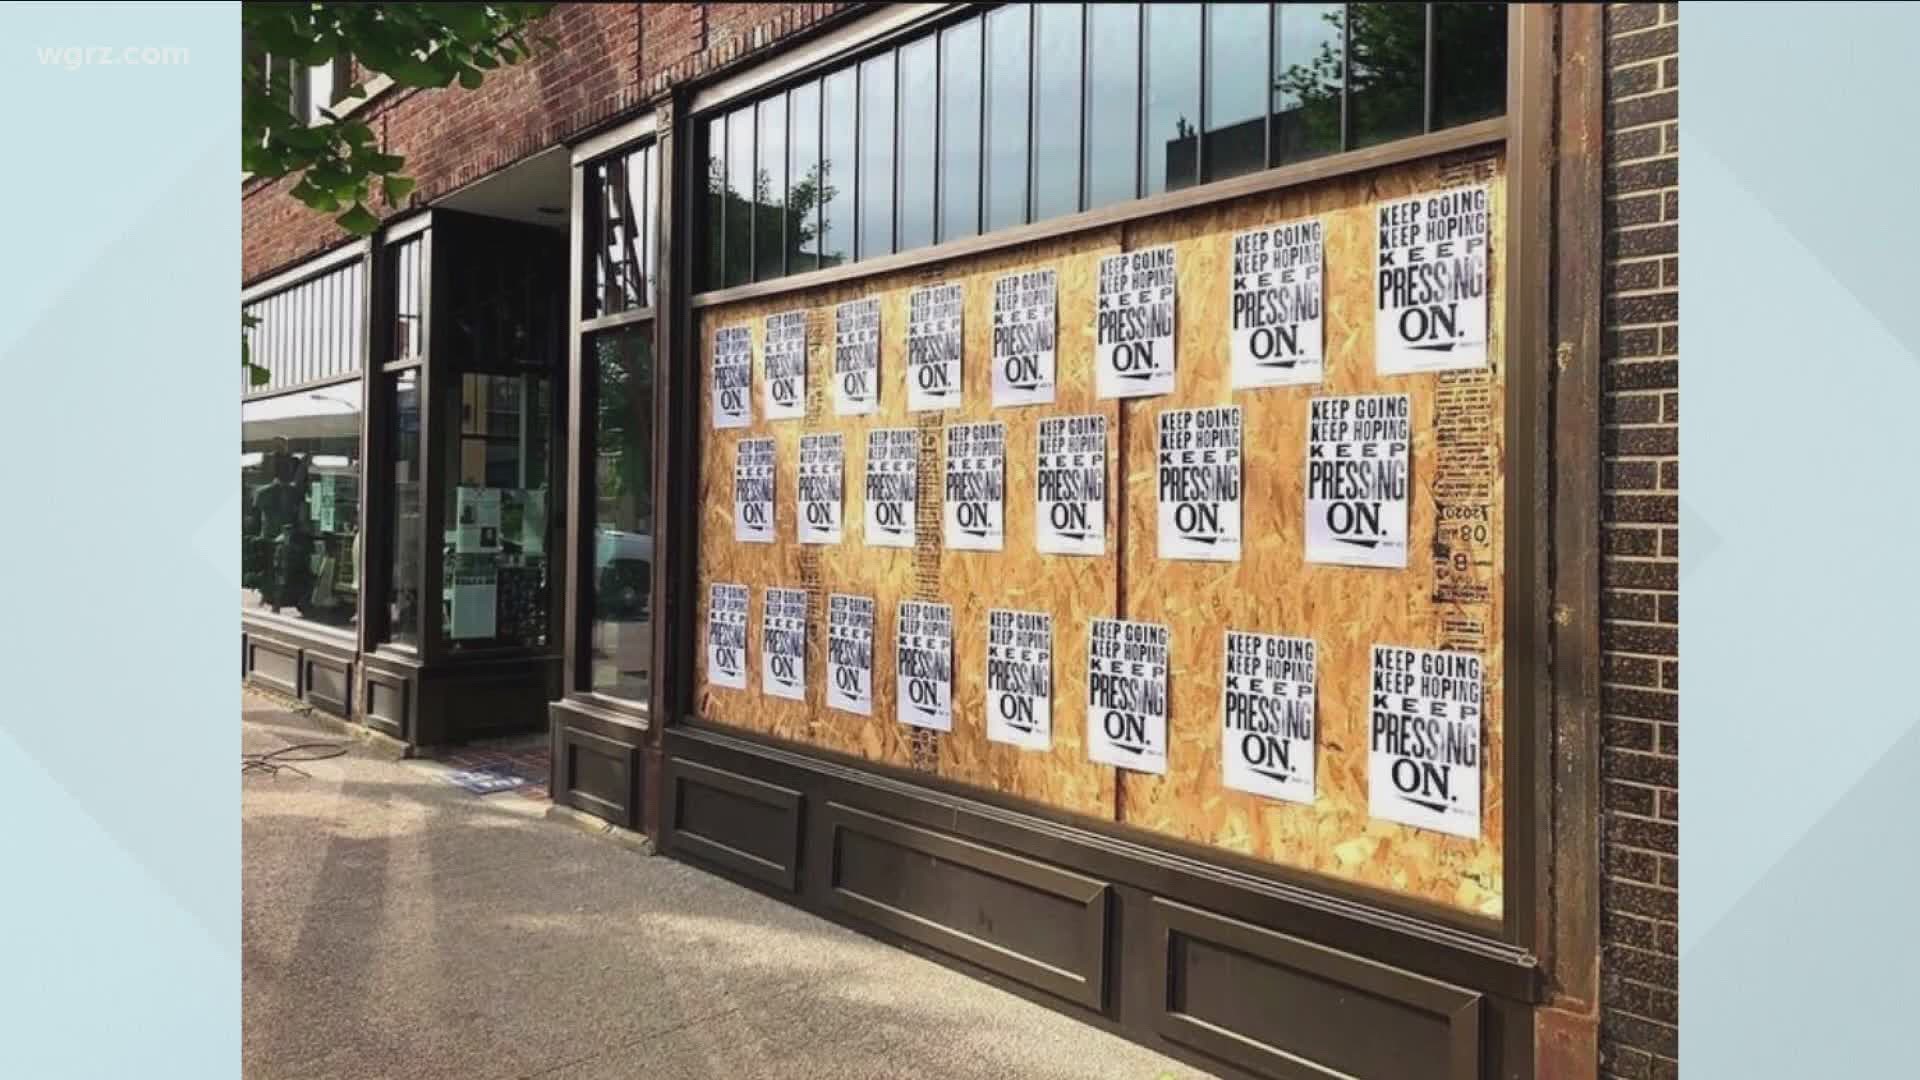 Supporters raised $4,000 to help organization repair window damaged after protests